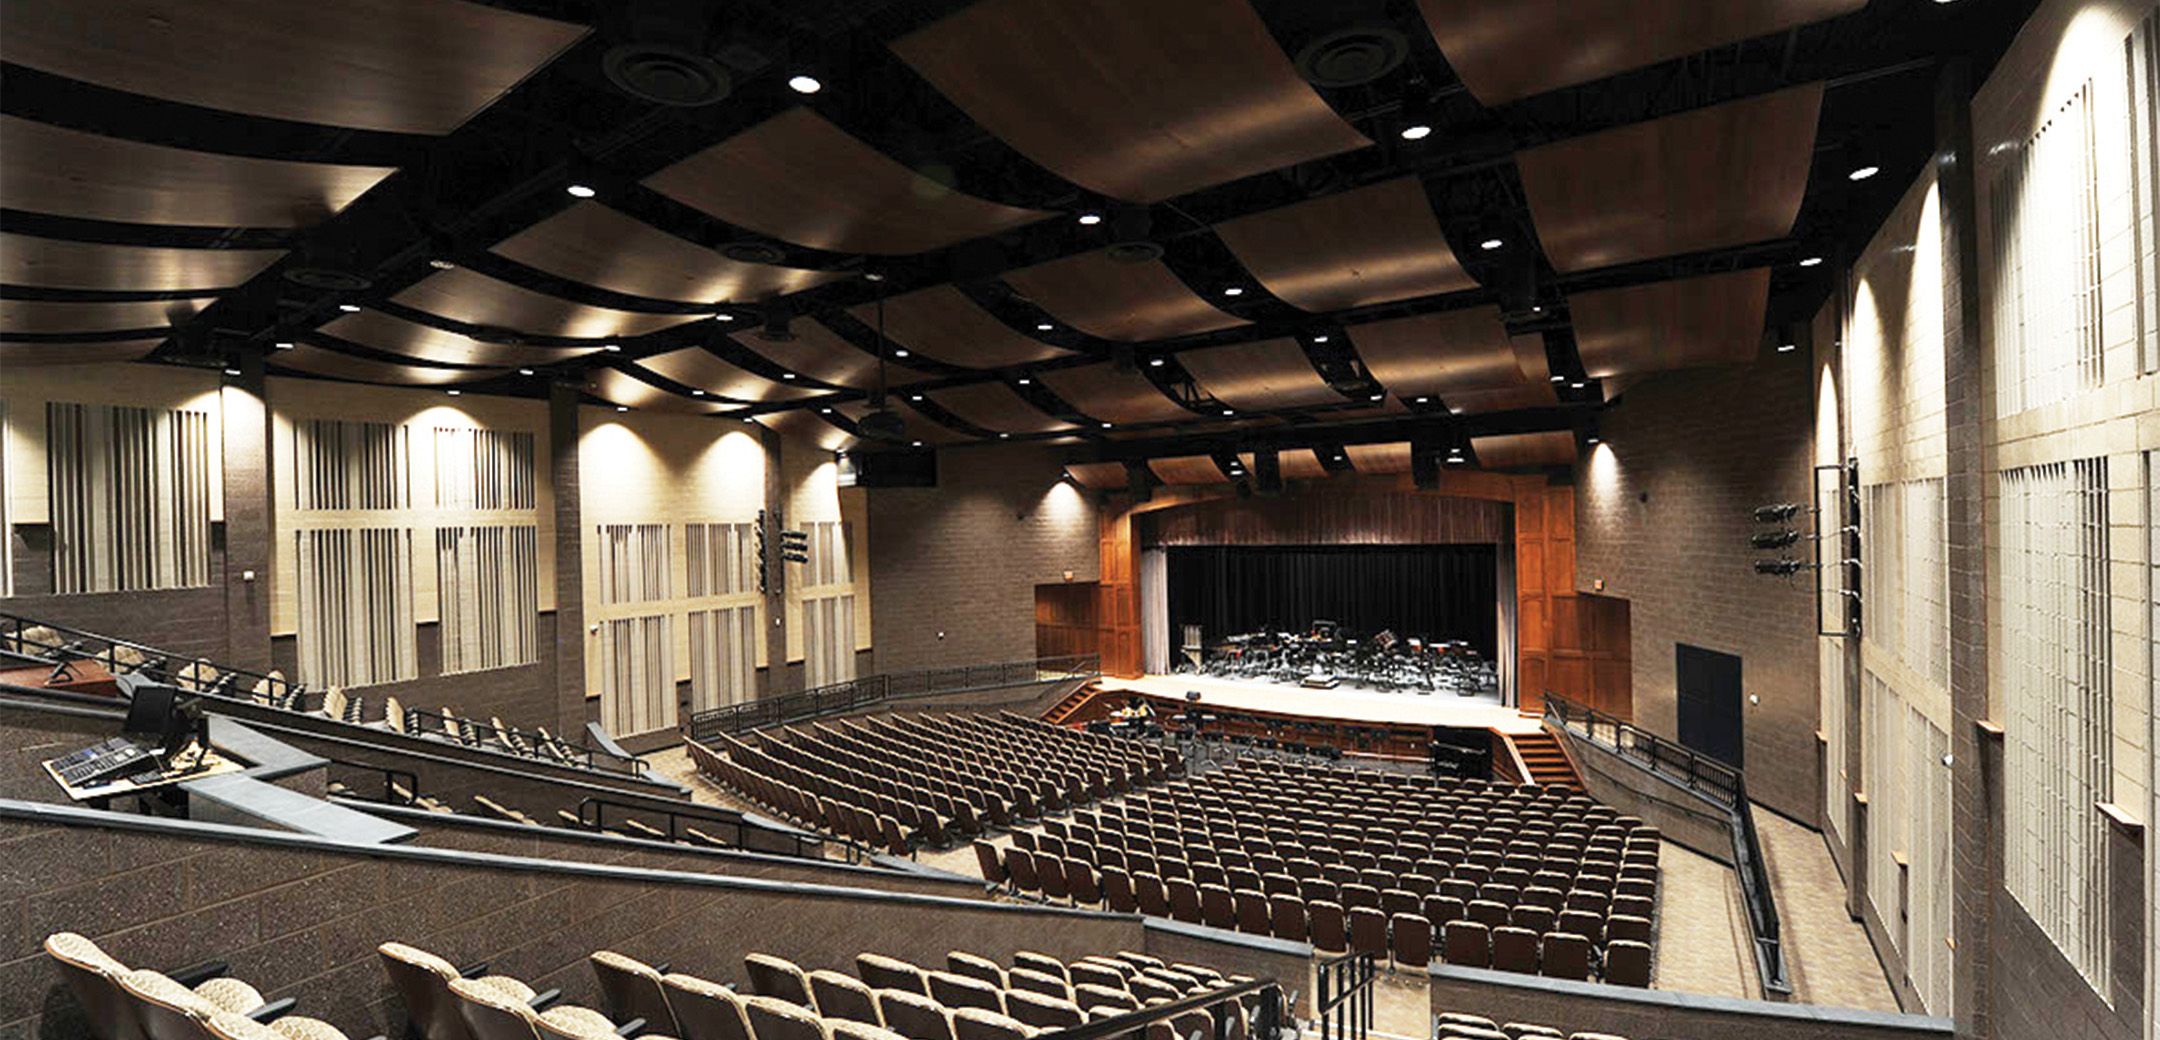 An interior view of the Phoenixville Middle School large auditorium from the upper level looking down towards the podium and floor level seating.